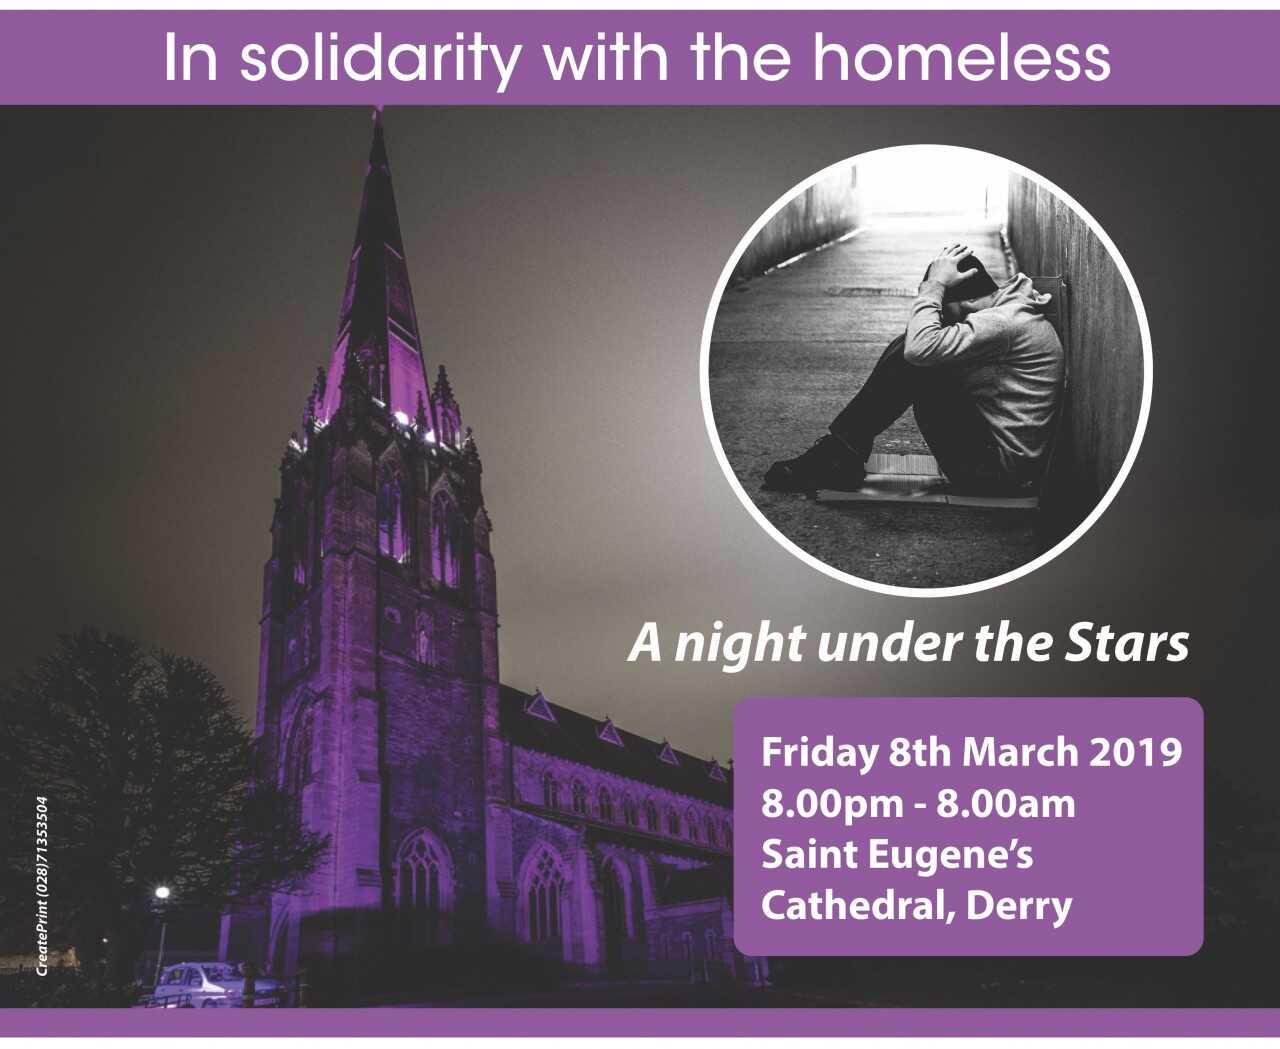 Sleep Out - Stay Awake Event - St Eugene's Cathedral, Derry - 8th March 2019